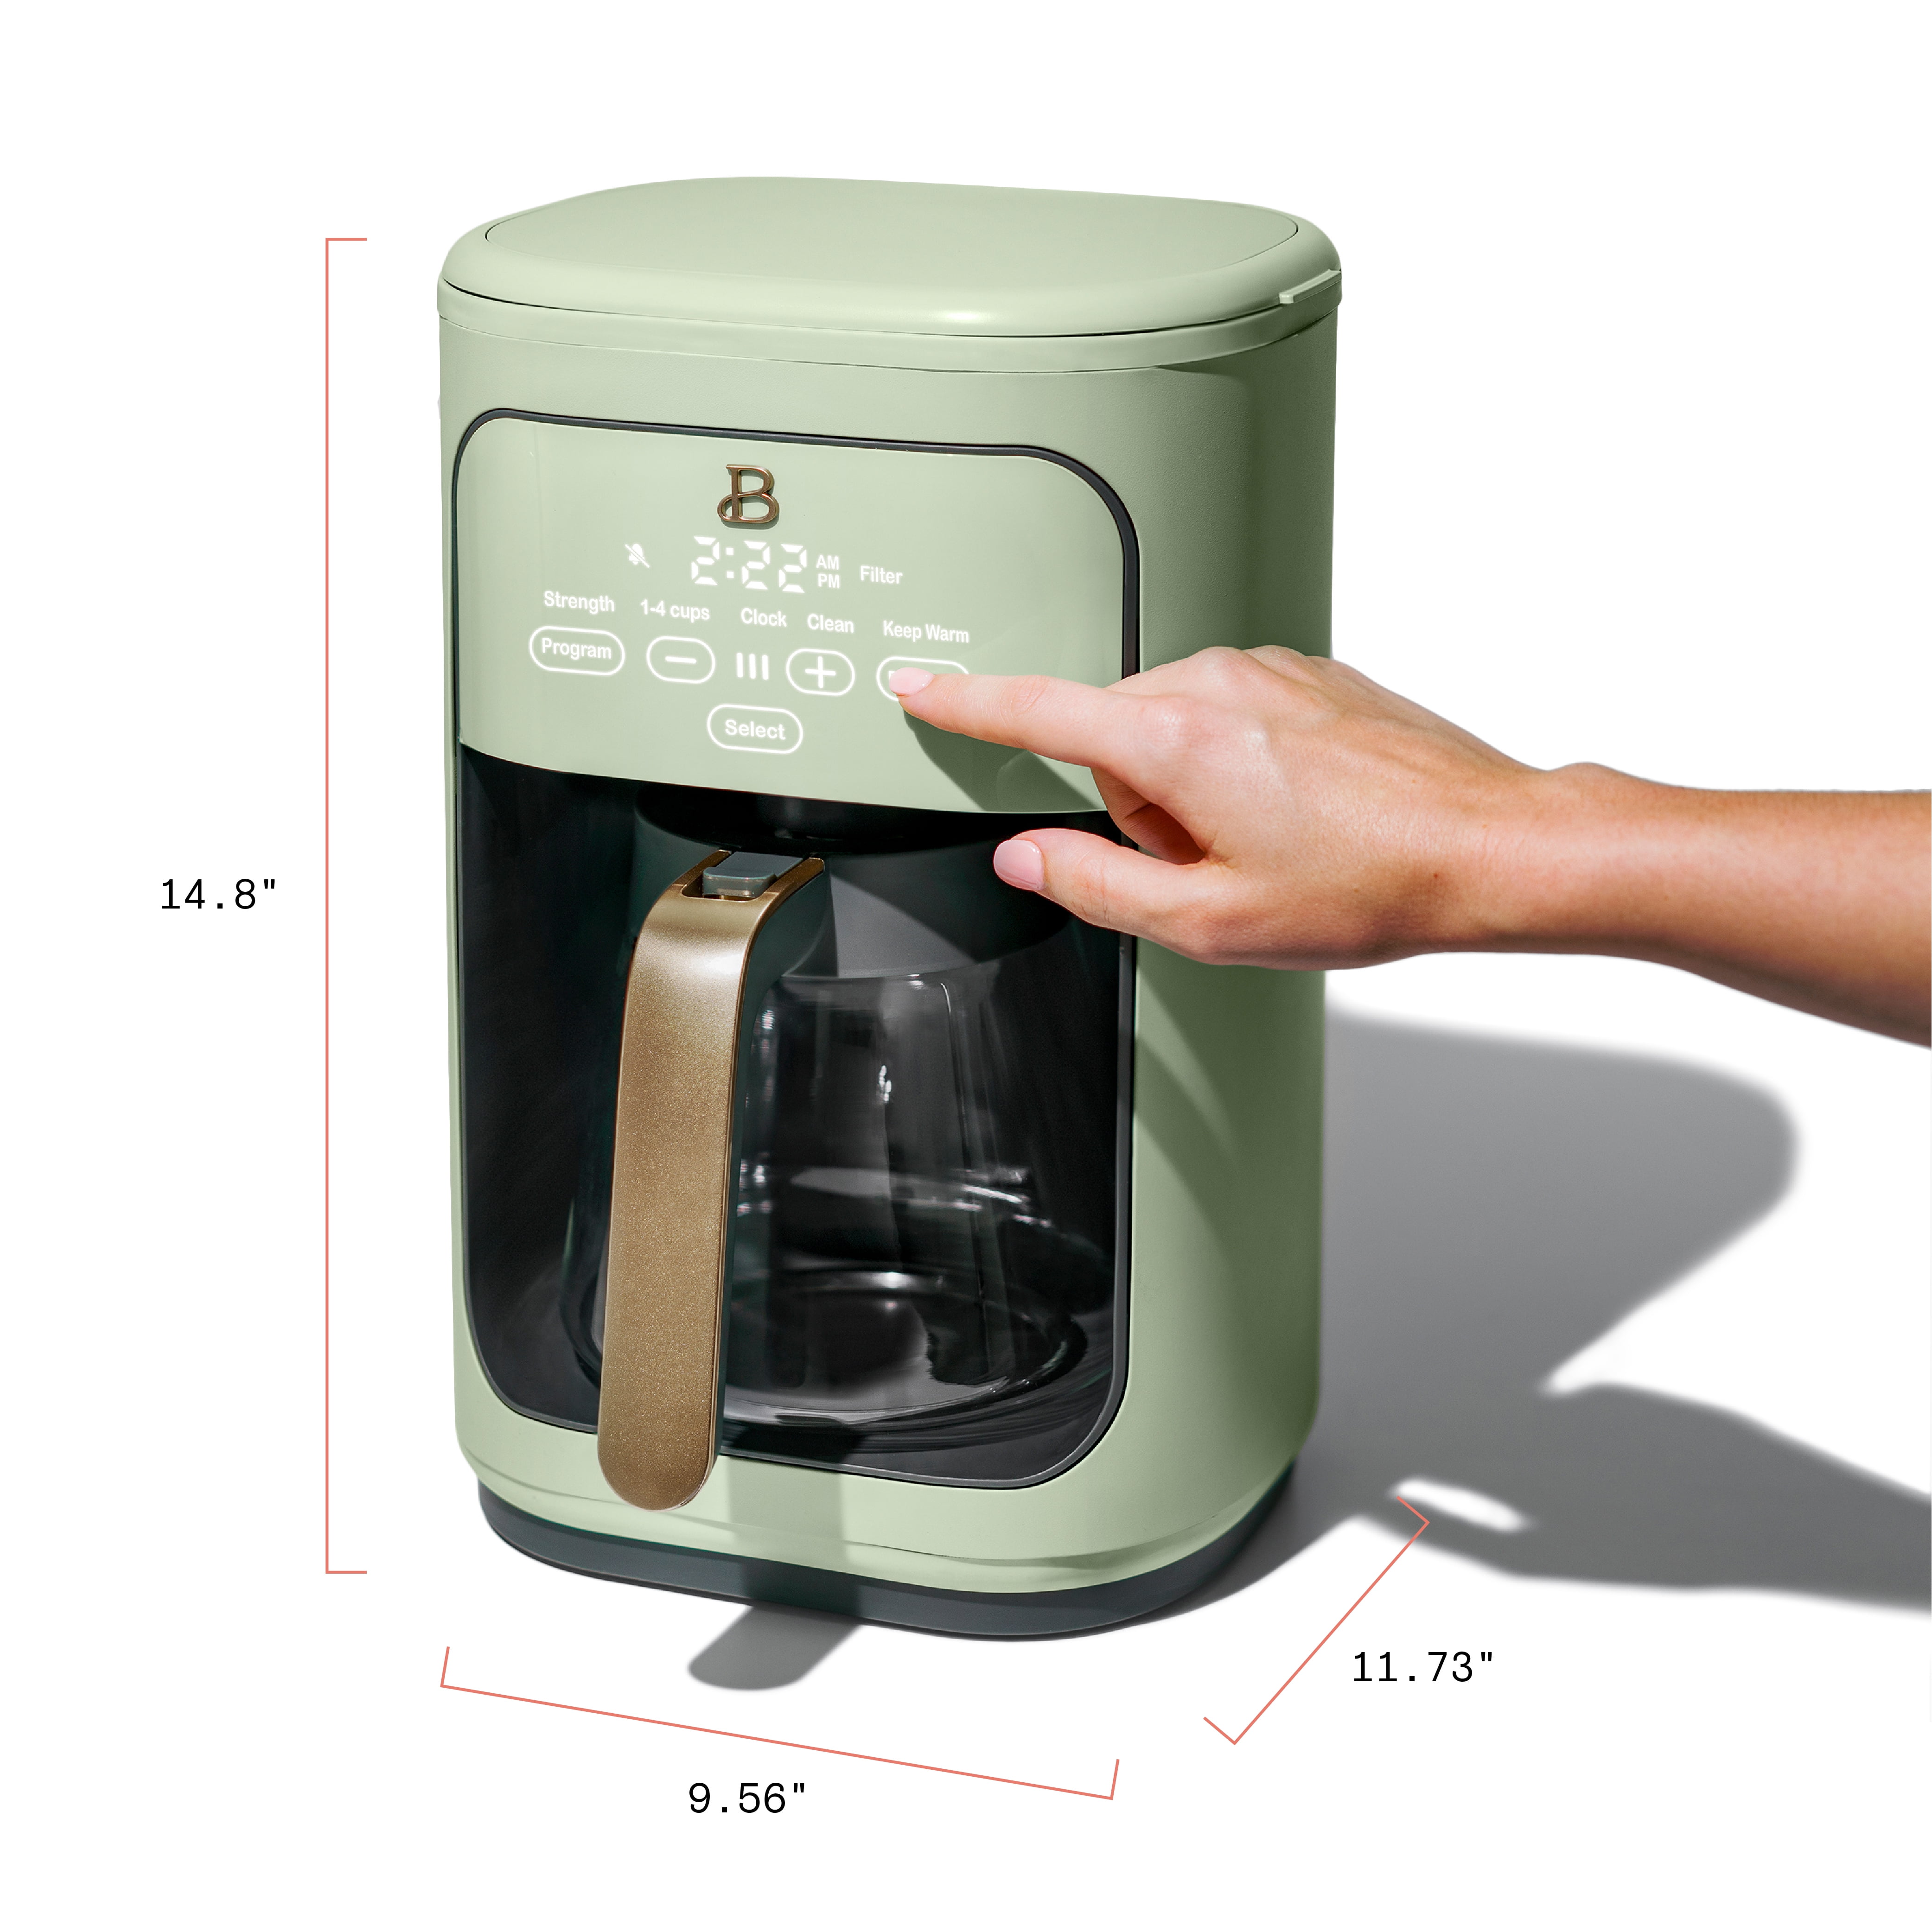 Beautiful by Drew Barrymore Coffee Maker Review